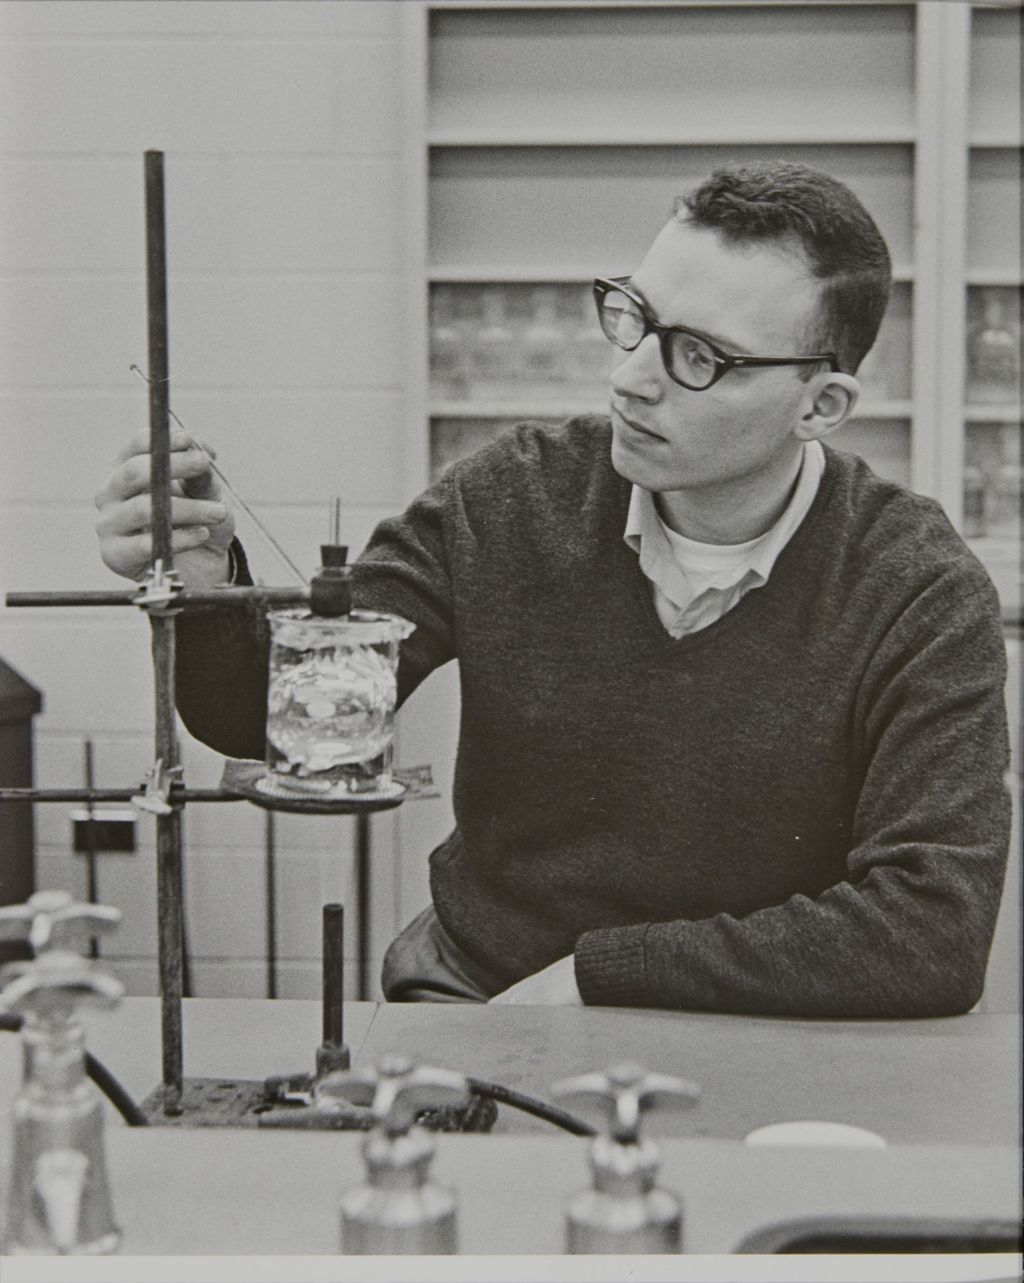 Miniature of Student with laboratory equiment in a Science and Engineering Laboratories classroom